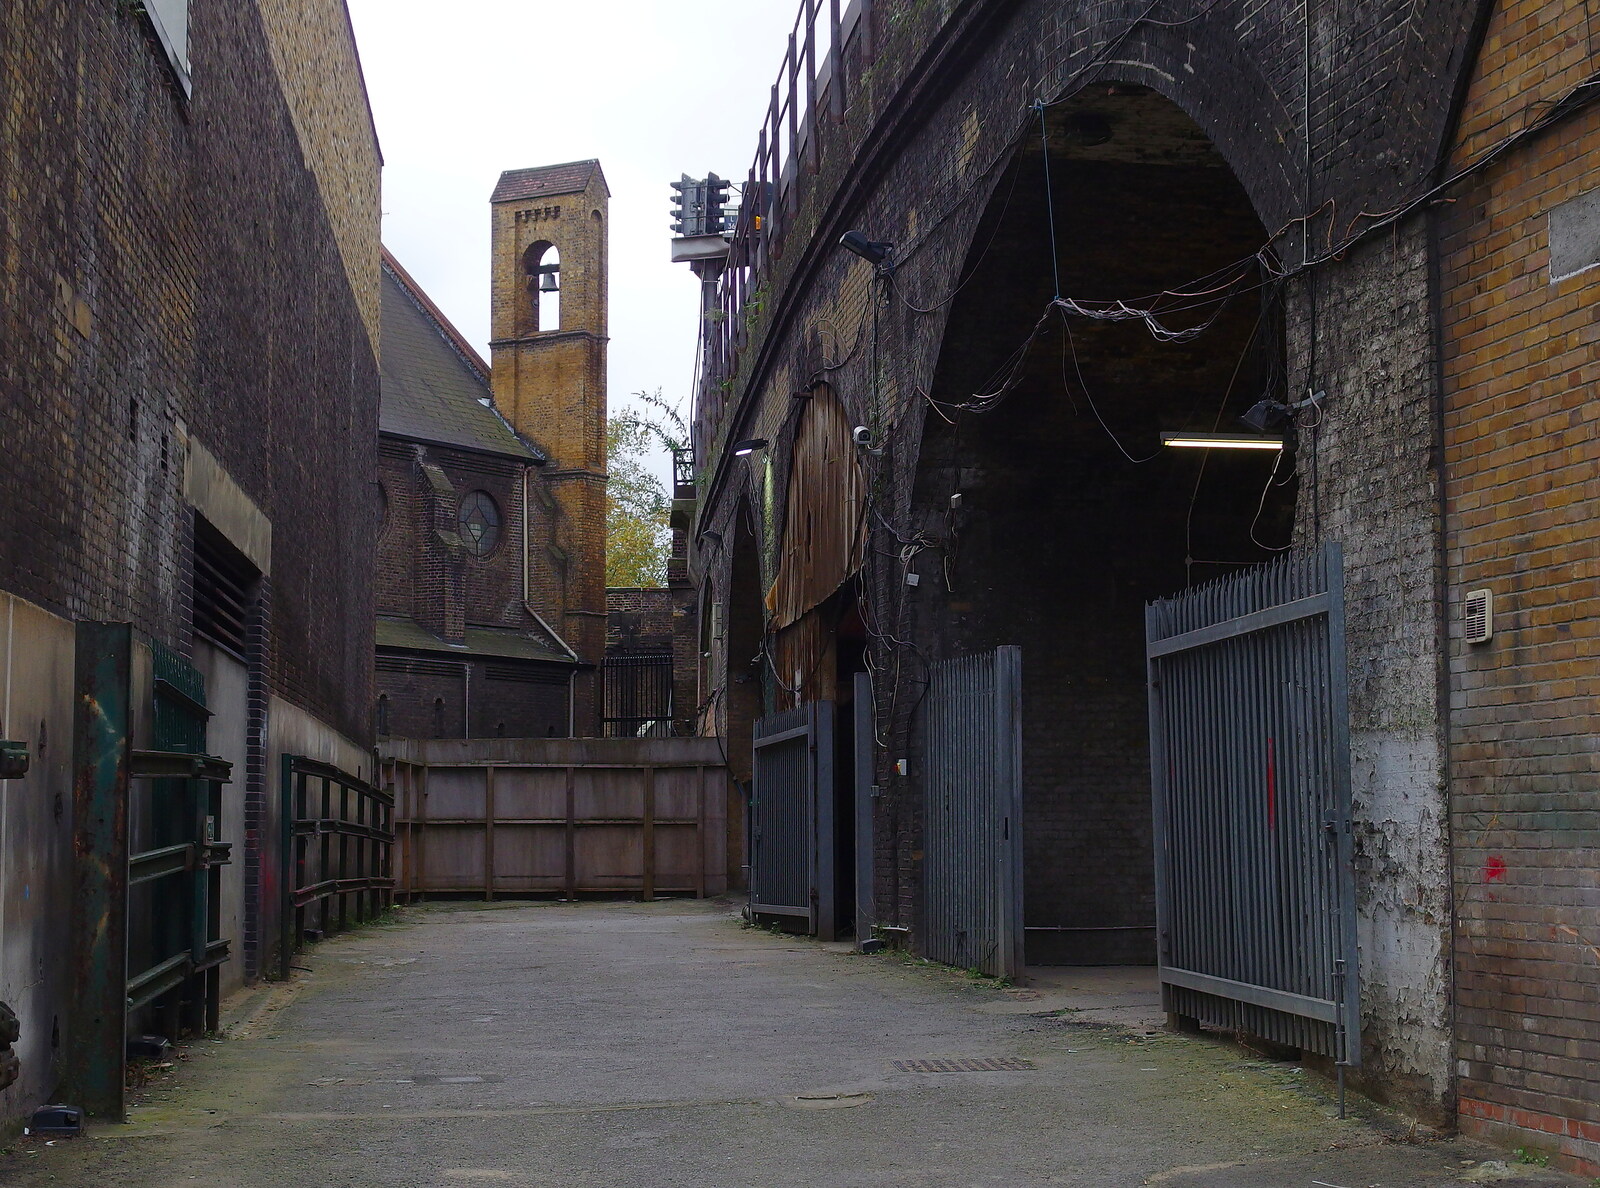 SwiftKey's Arcade Cabinet, and the Streets of Southwark, London - 5th December 2013: Backstreet railway arches